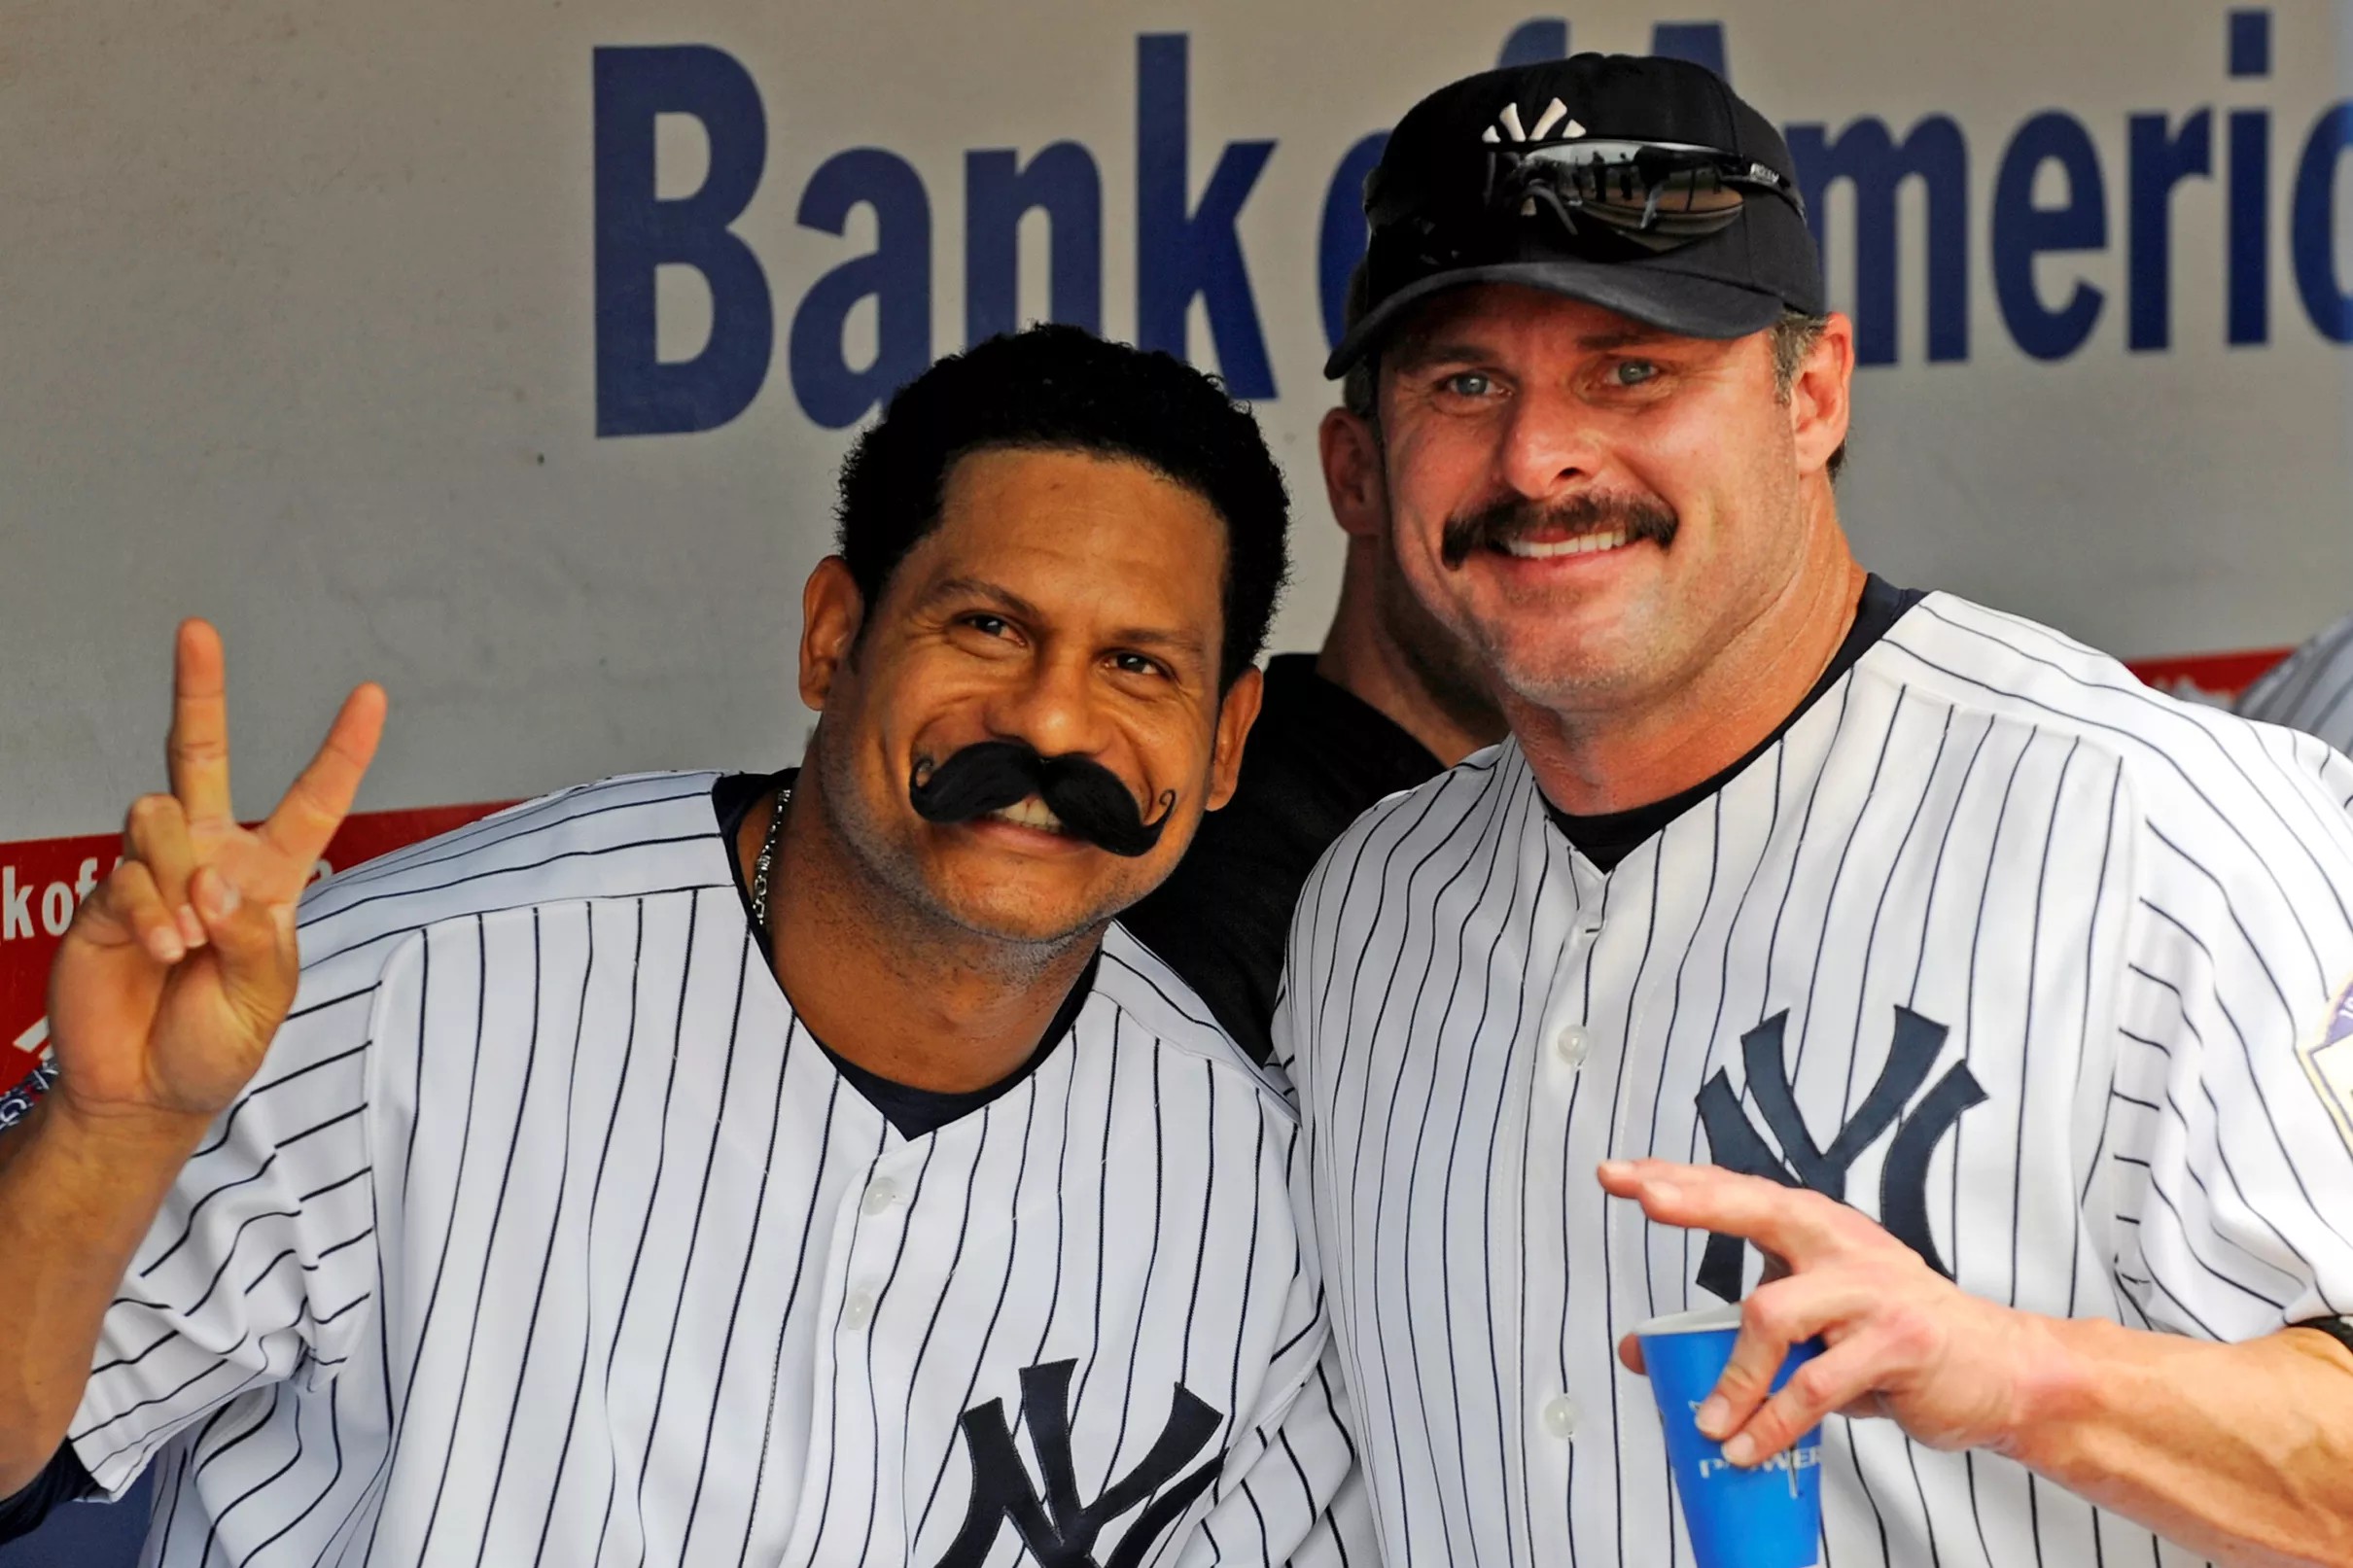 The Story Behind The Yankees’ Facial Hair Policy